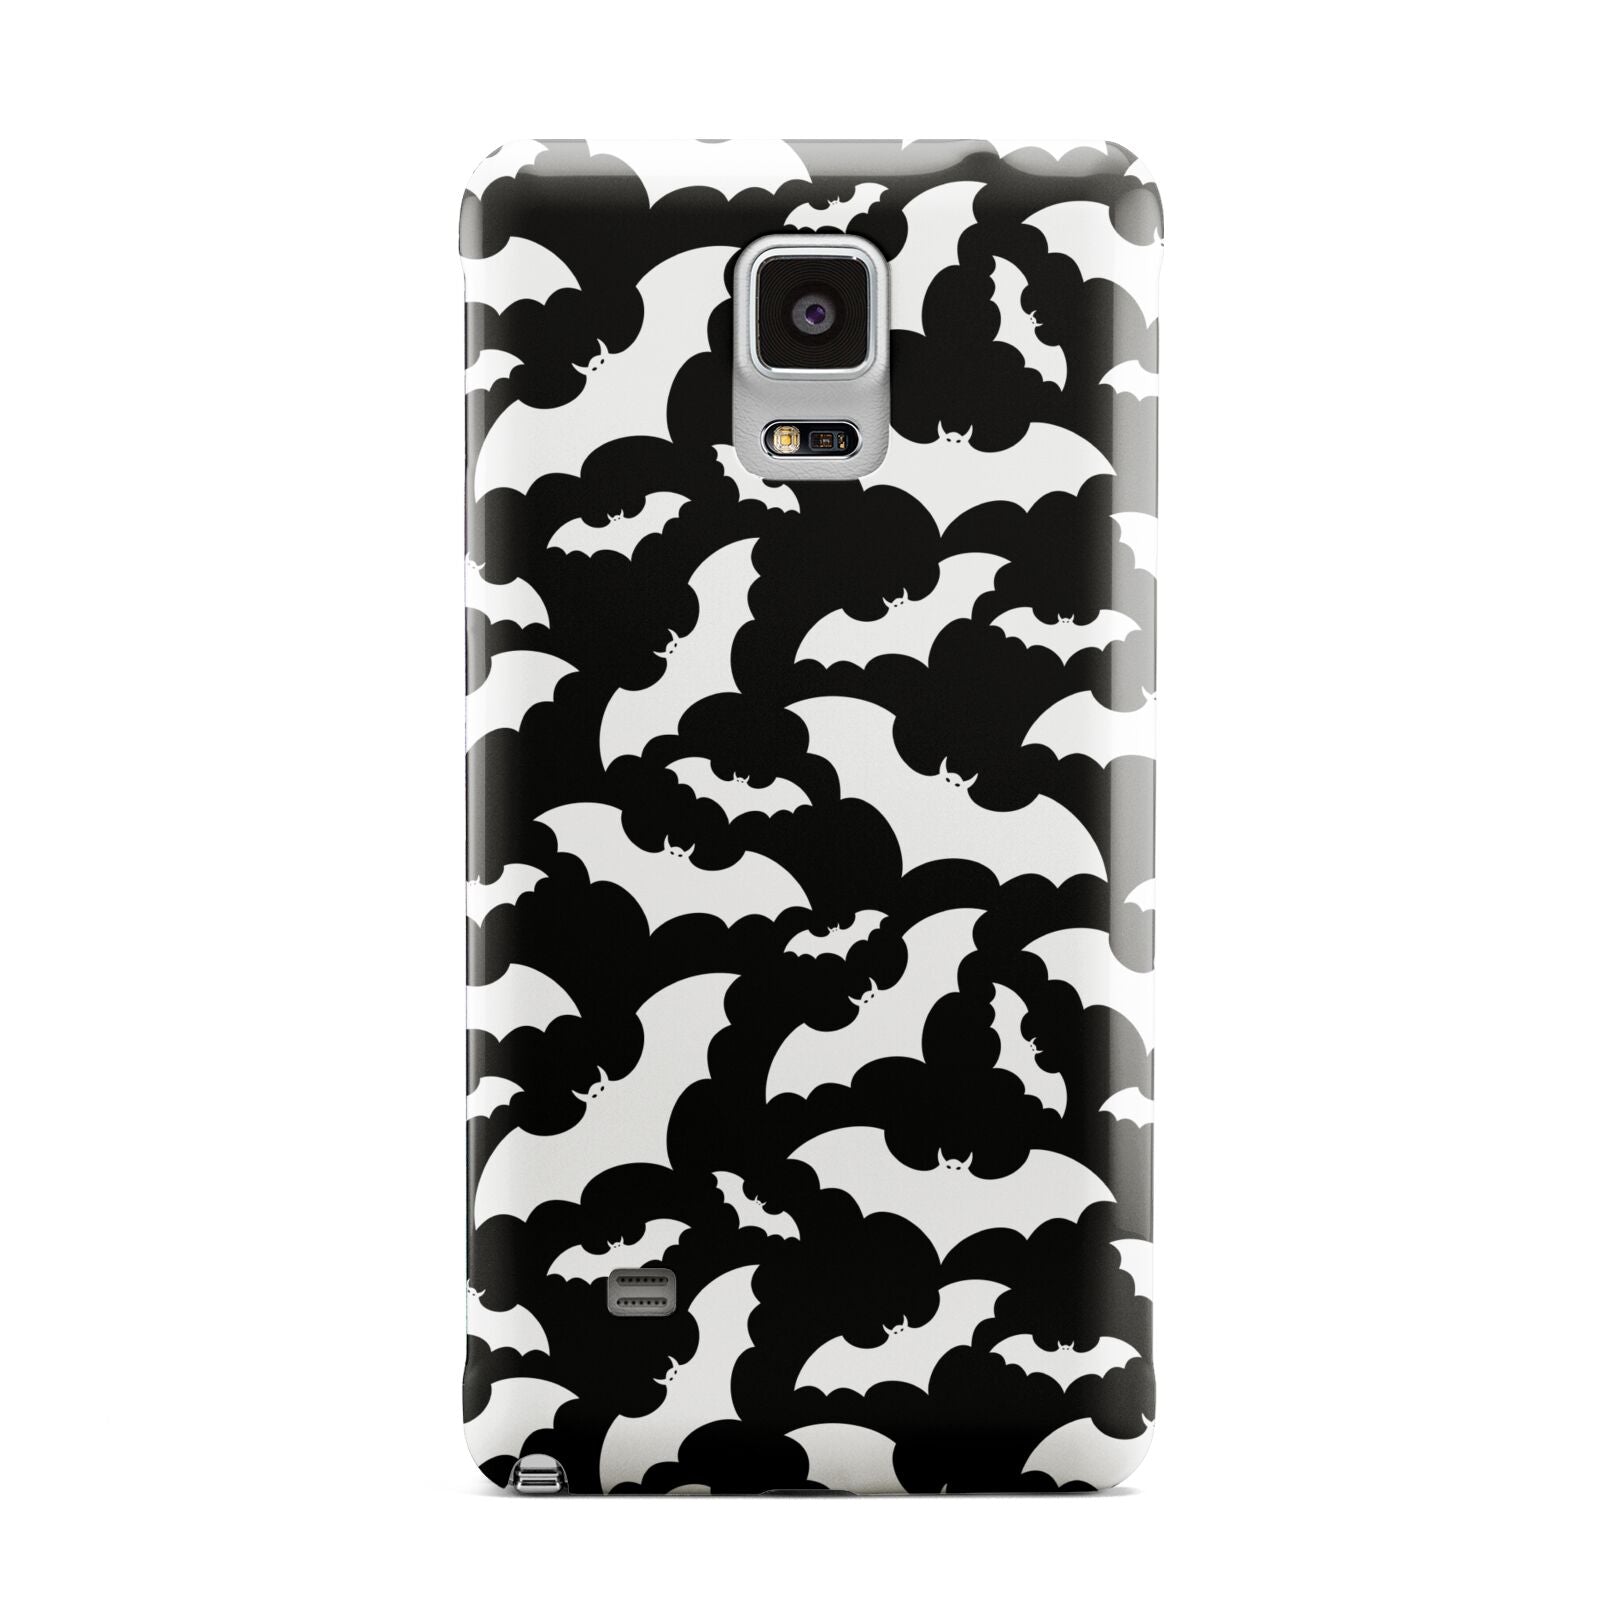 Black and White Bats Samsung Galaxy Note 4 Case